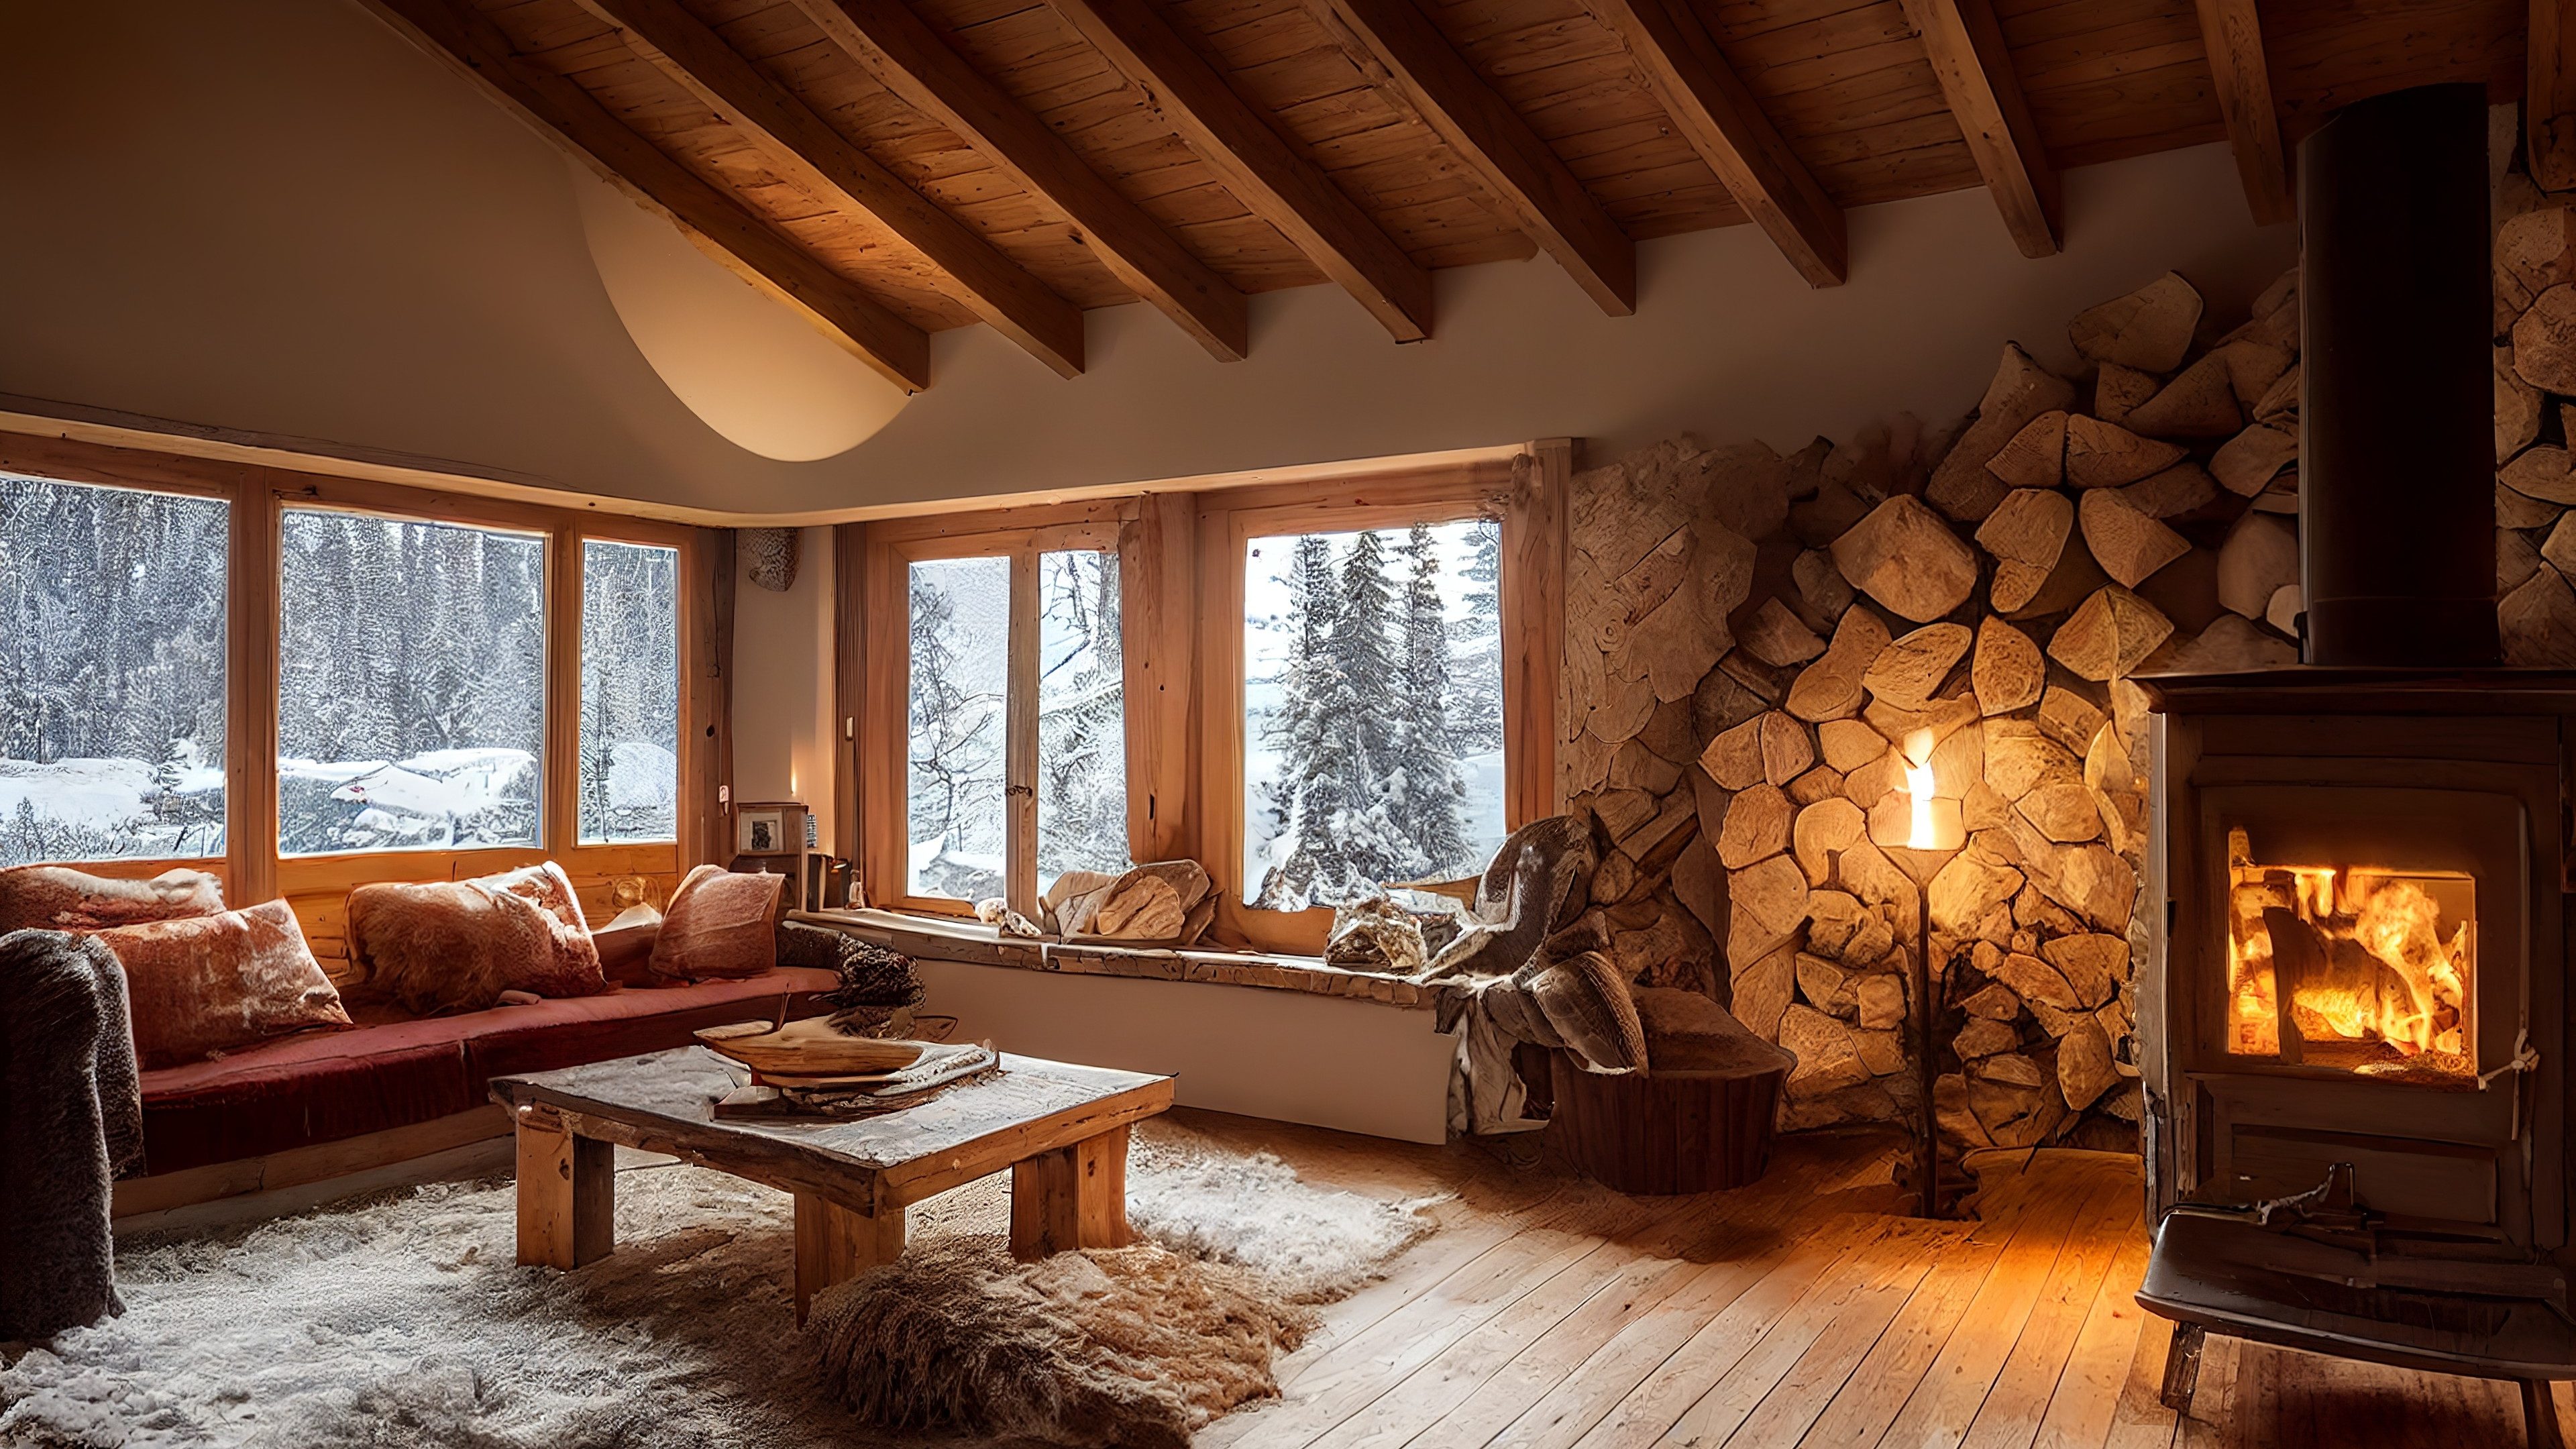 Warm winter chalet house interior with wooden beams and fireplace illustration 